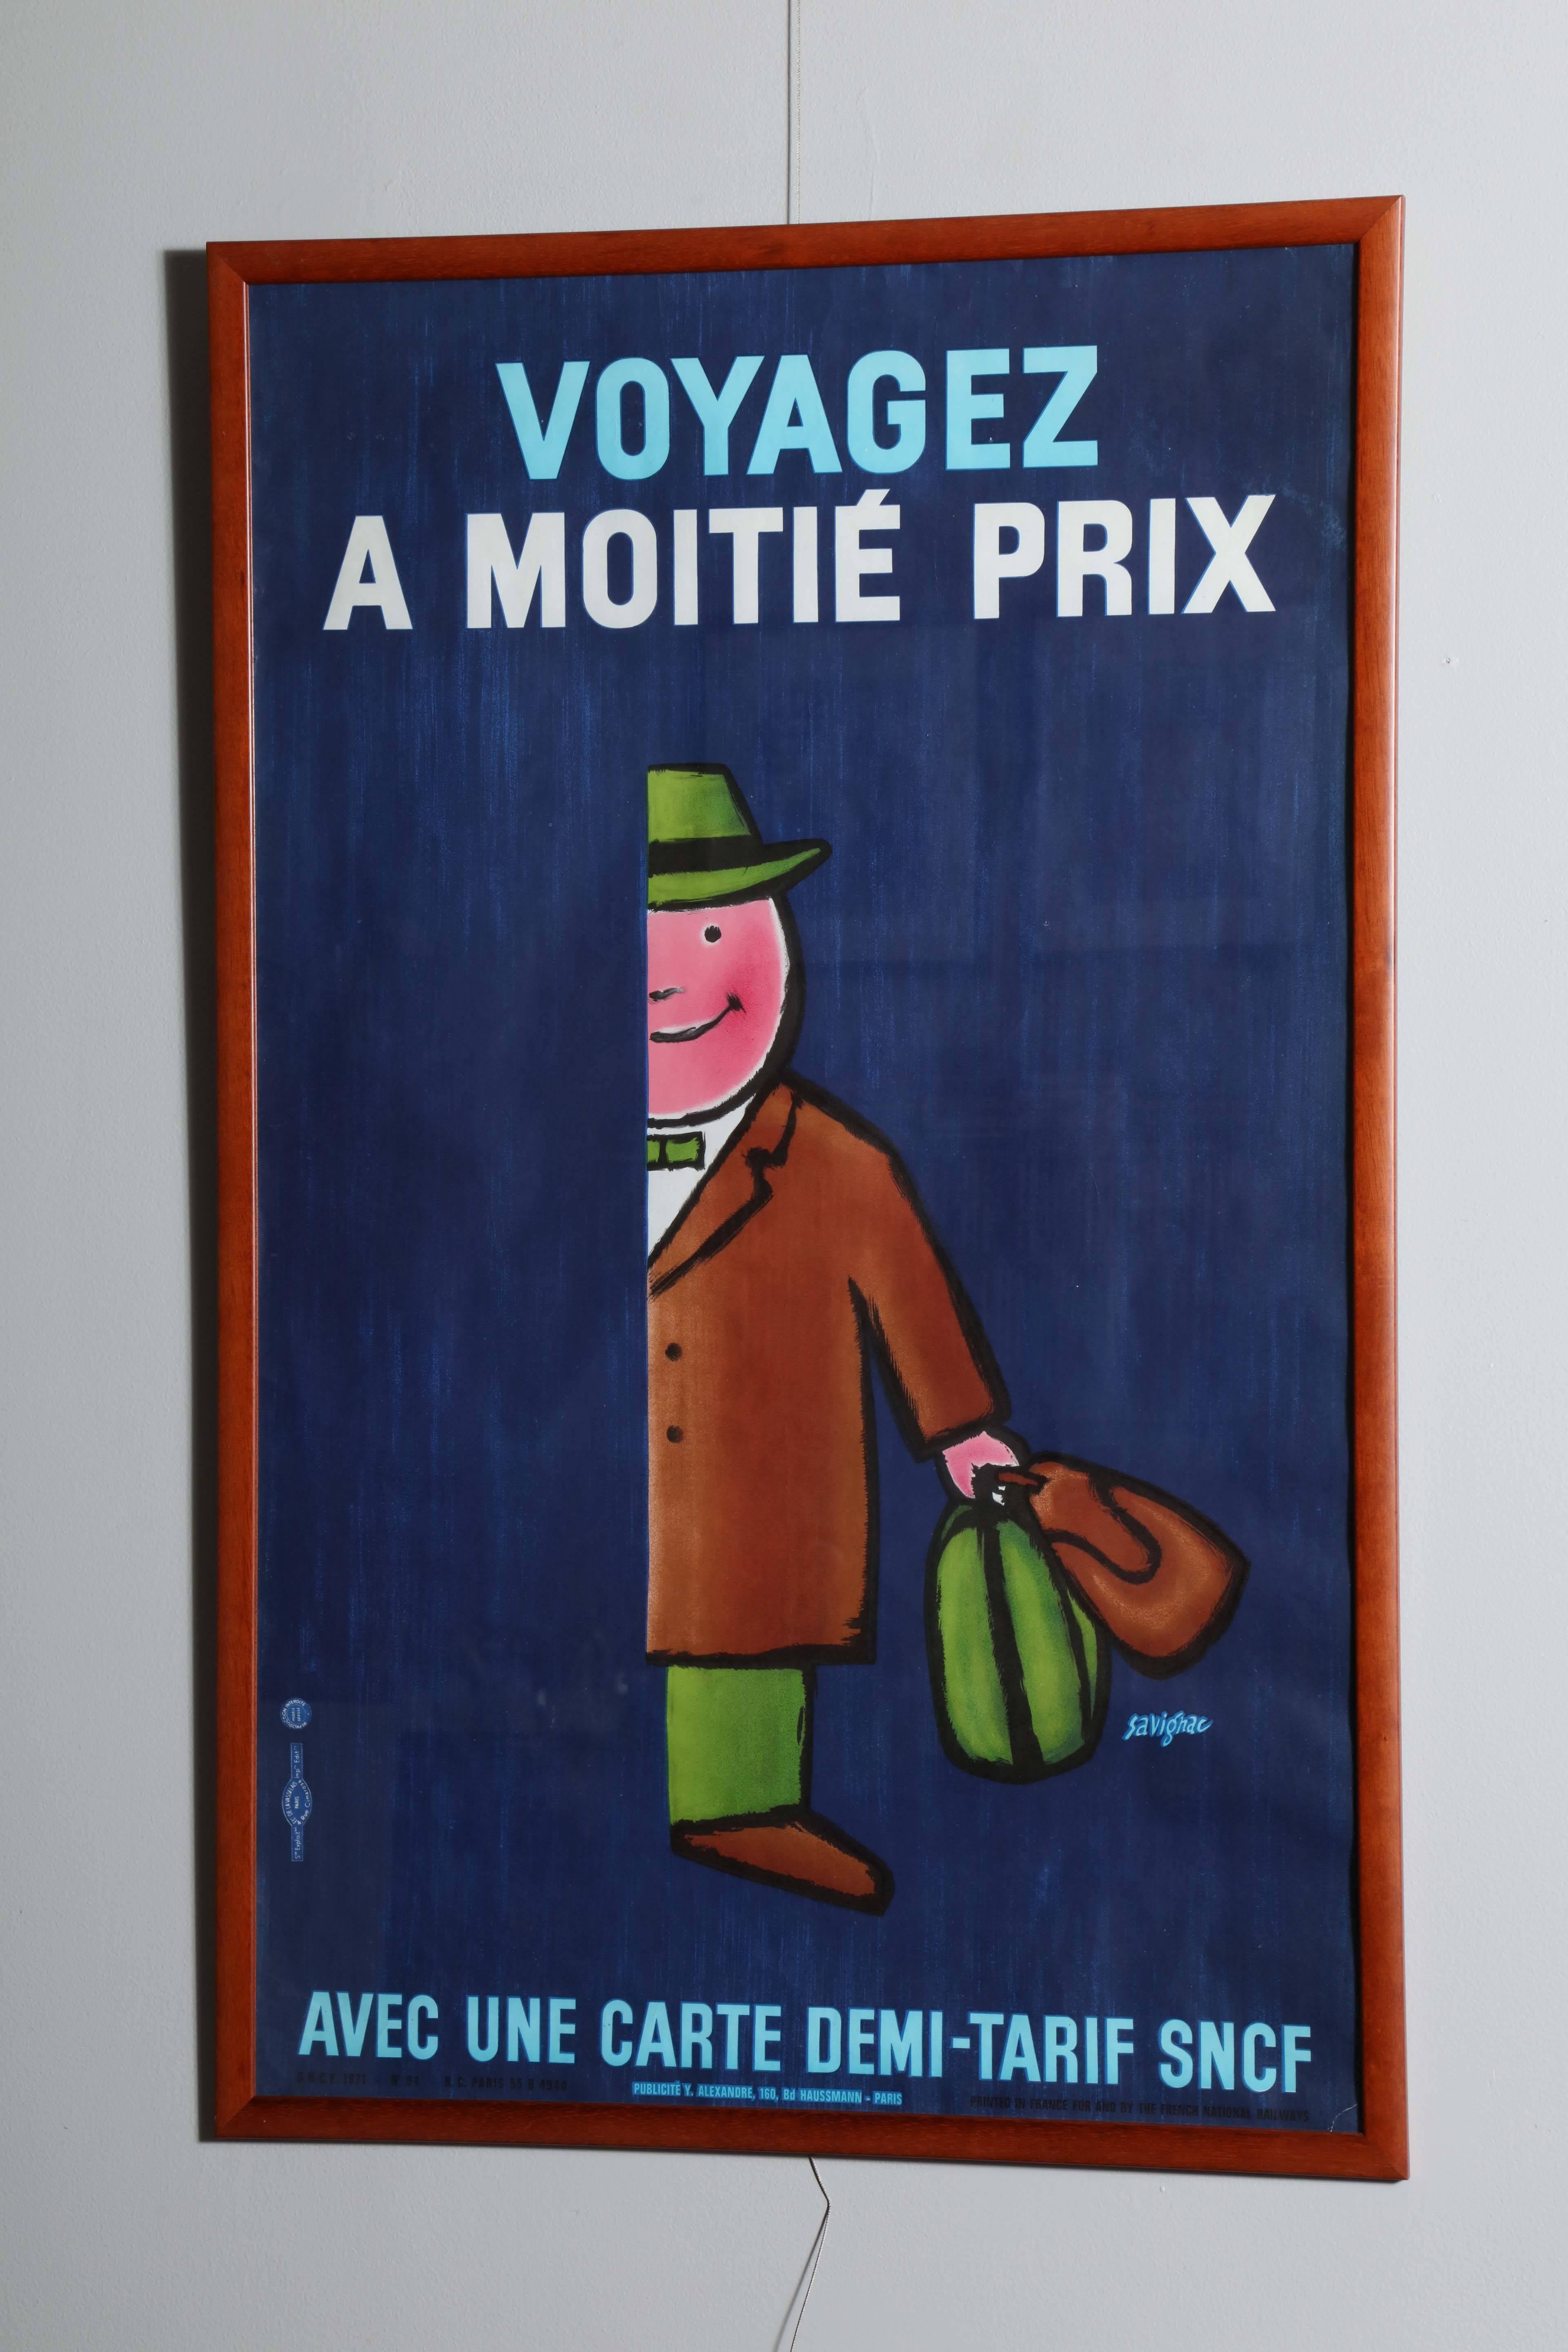 A framed vintage French poster.
Translation: Travel at half price with a half price card. Humor obvious.